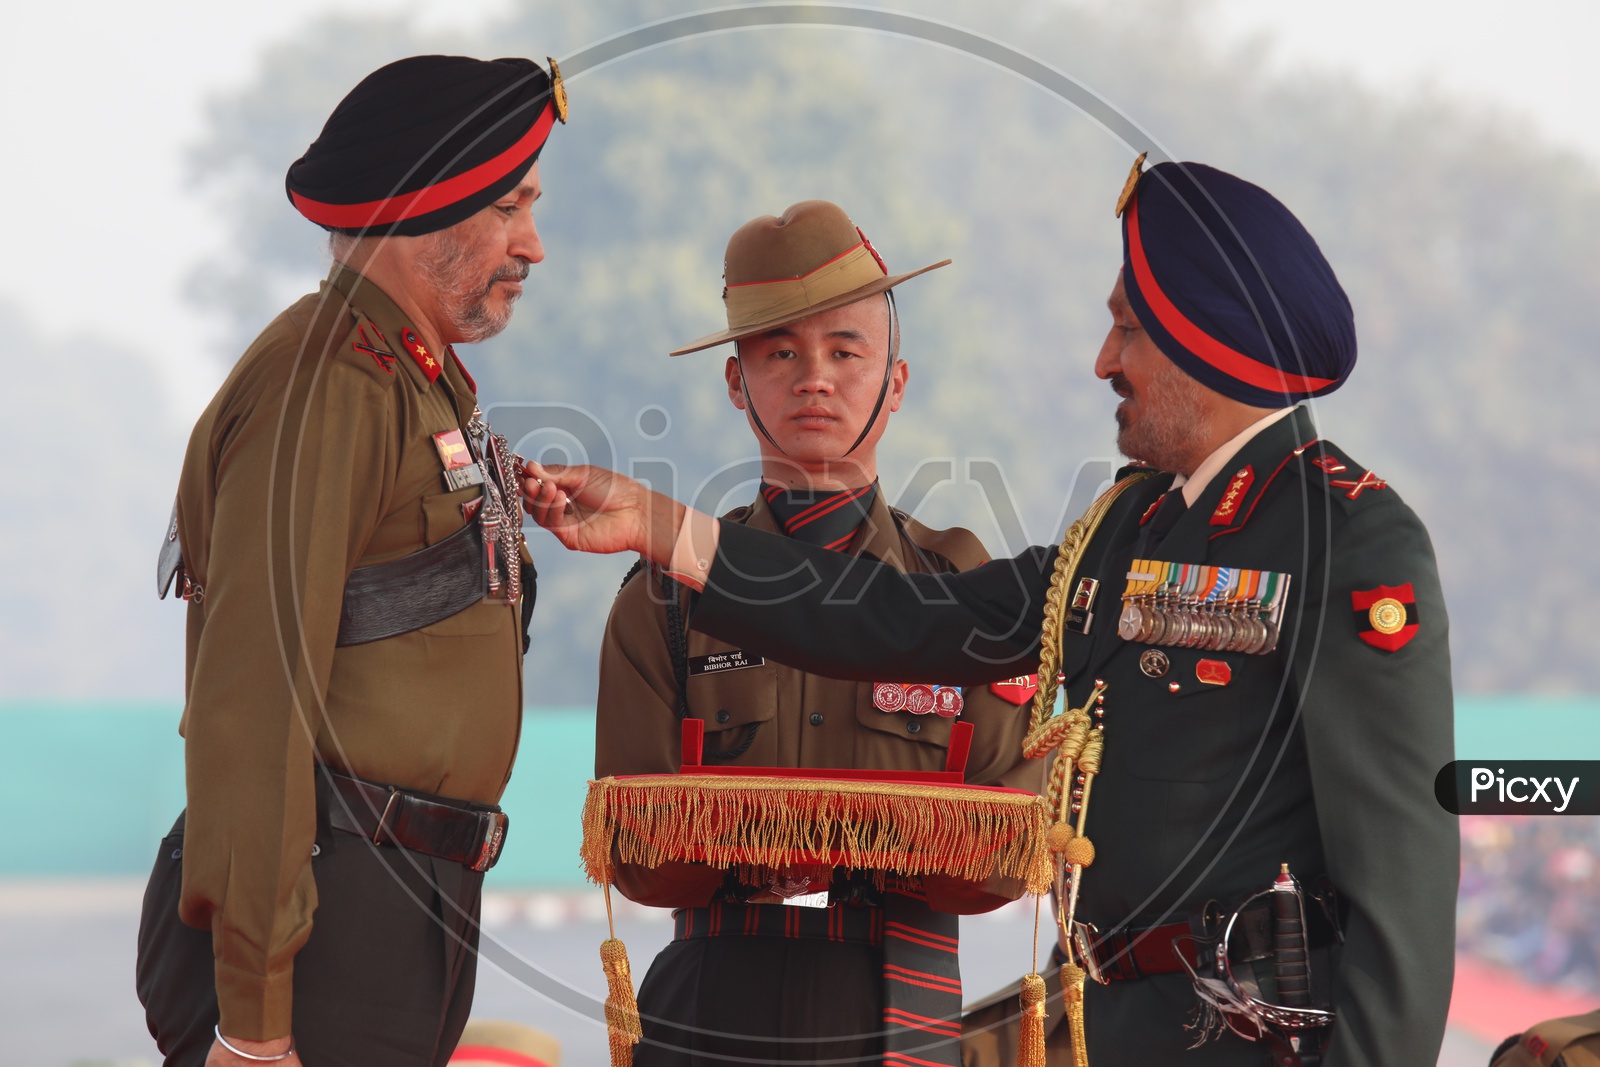 Medal Ceremony | Indian Army Day Celebrations at Parade Ground in Delhi